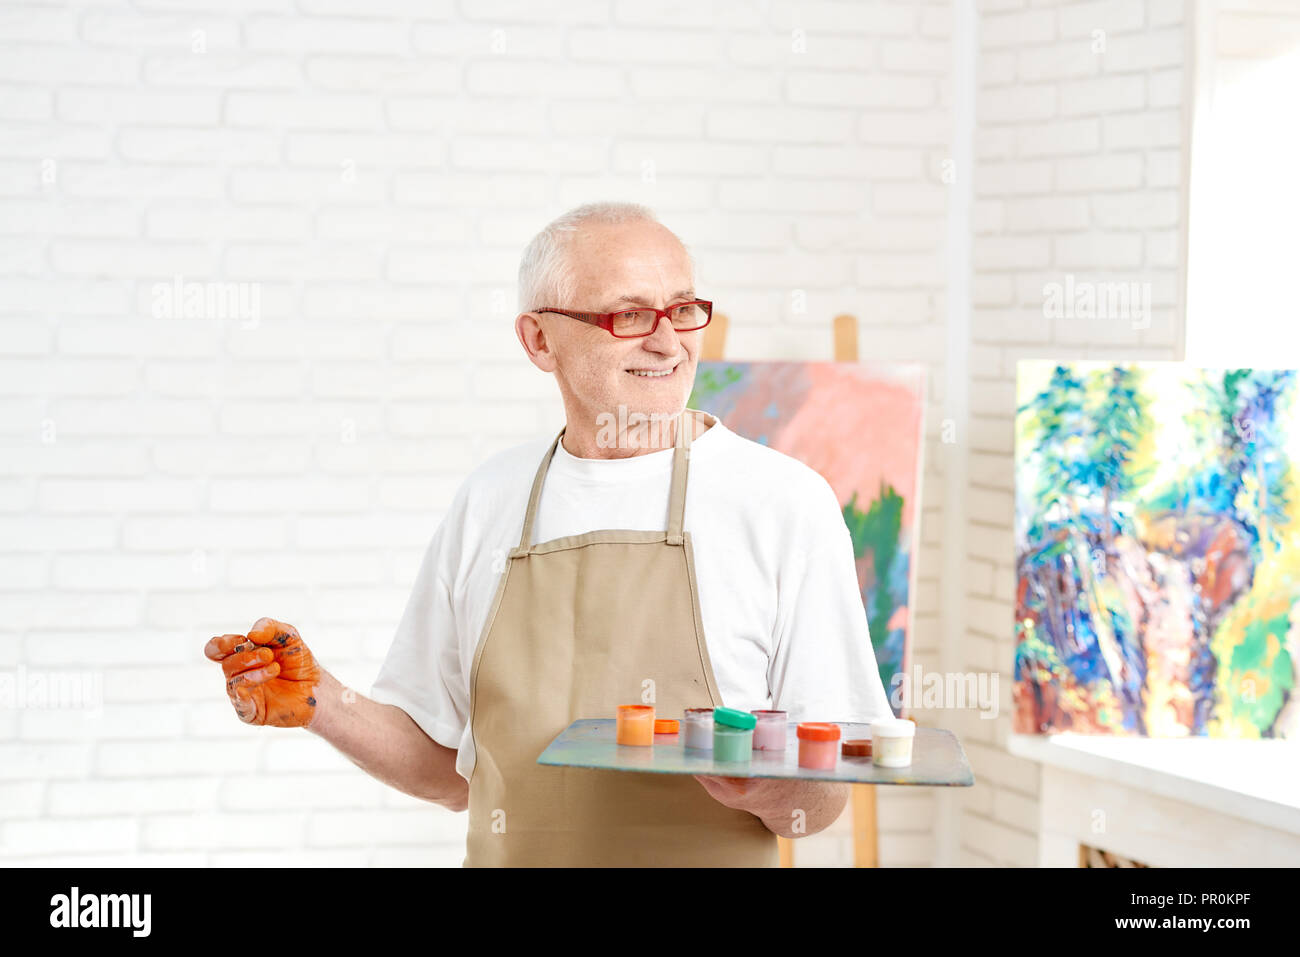 Senior male painter, standing with palette of colors in hand, picking up paint to picture, other hand contaminated with orange paint. Handsome man wearing in white t-shirt and apron, looking at work. Stock Photo